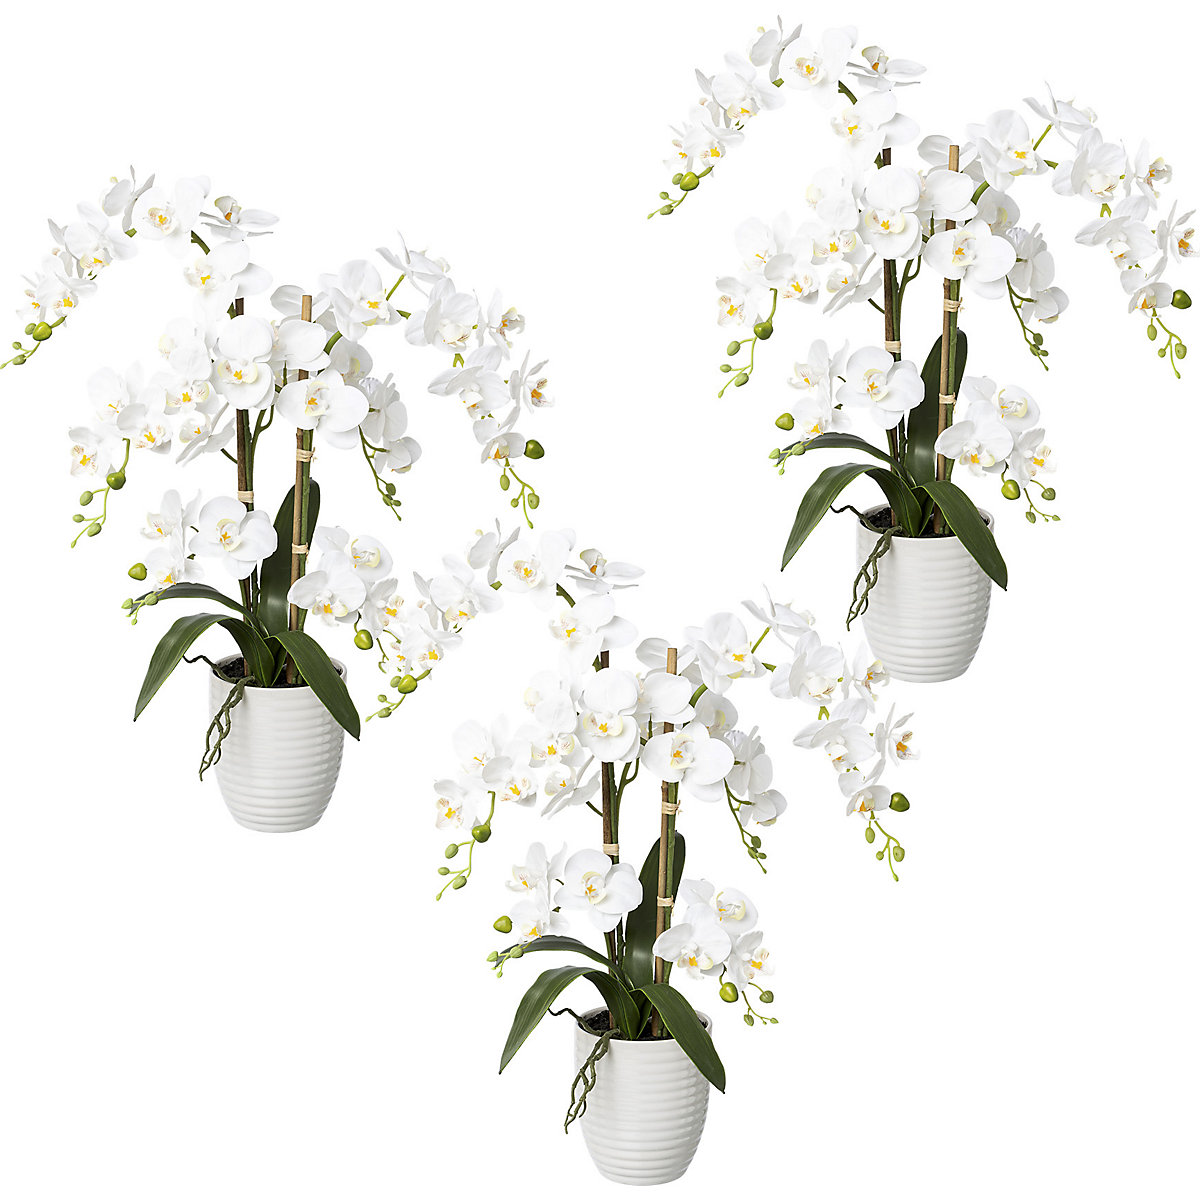 Orchidea phalaenopsis, real touch